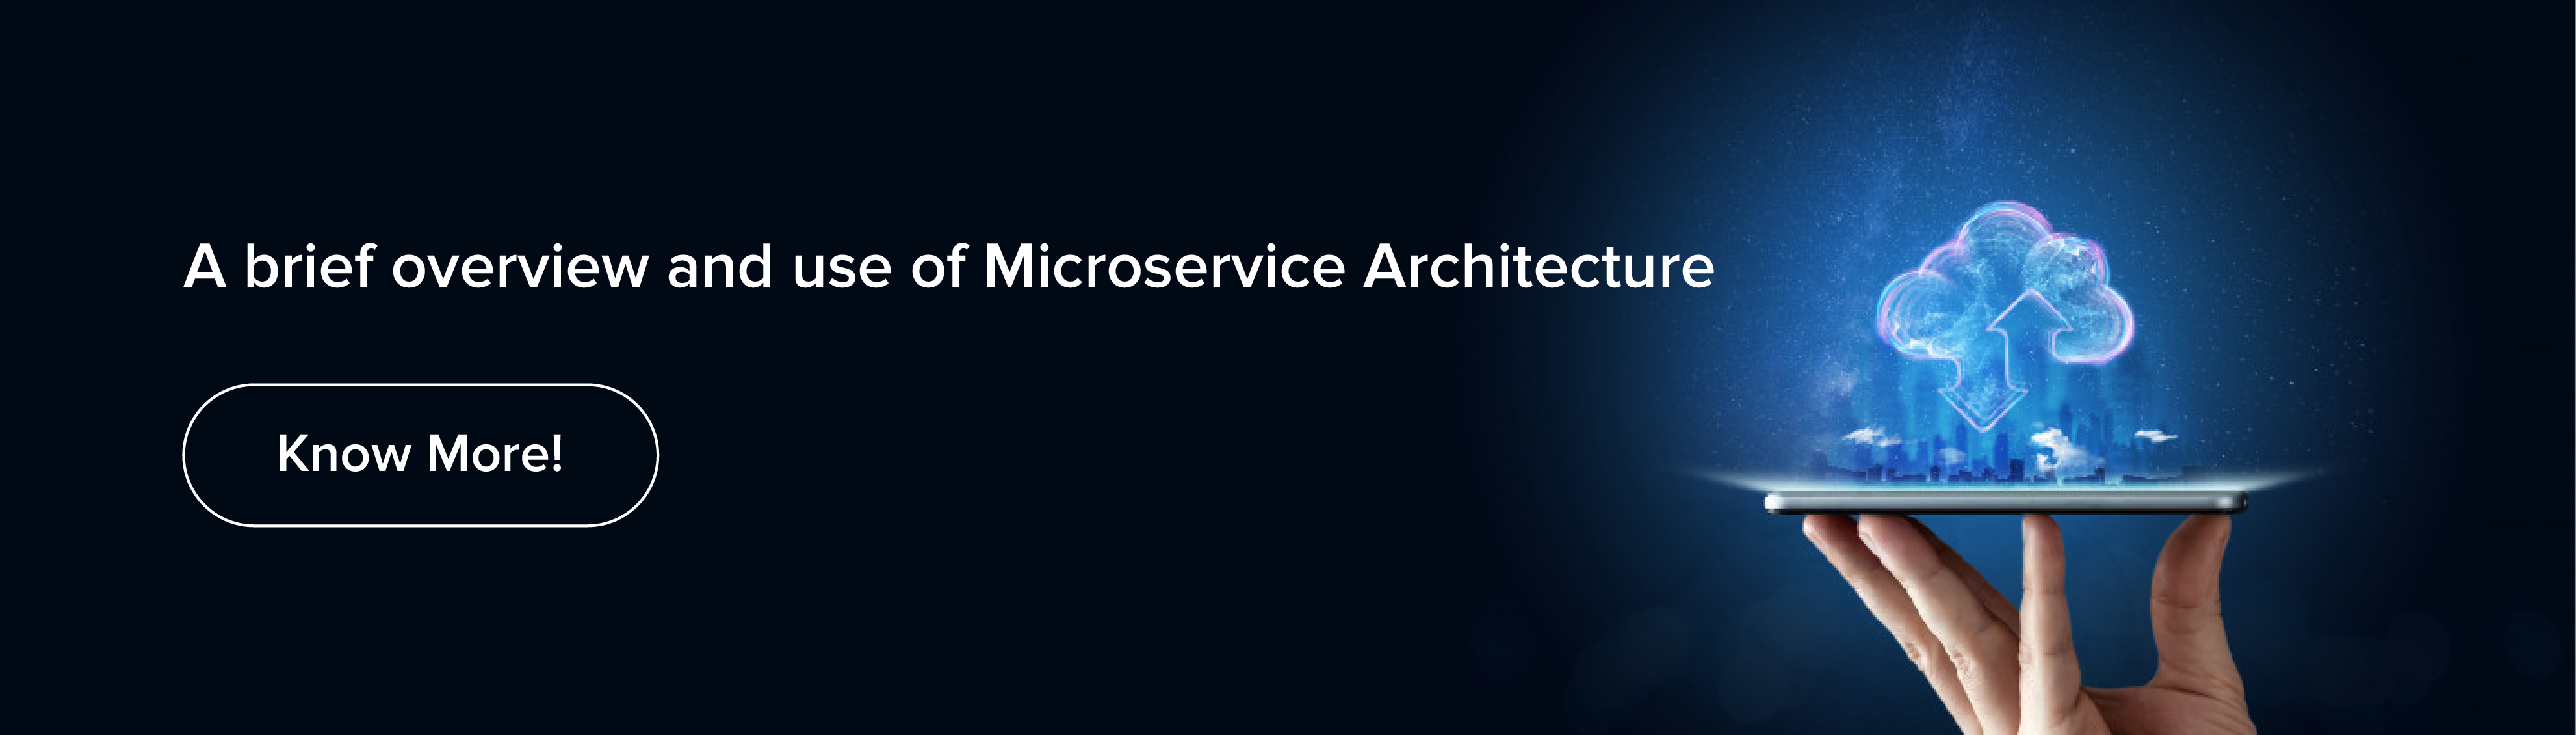 use of Microservice Architecture